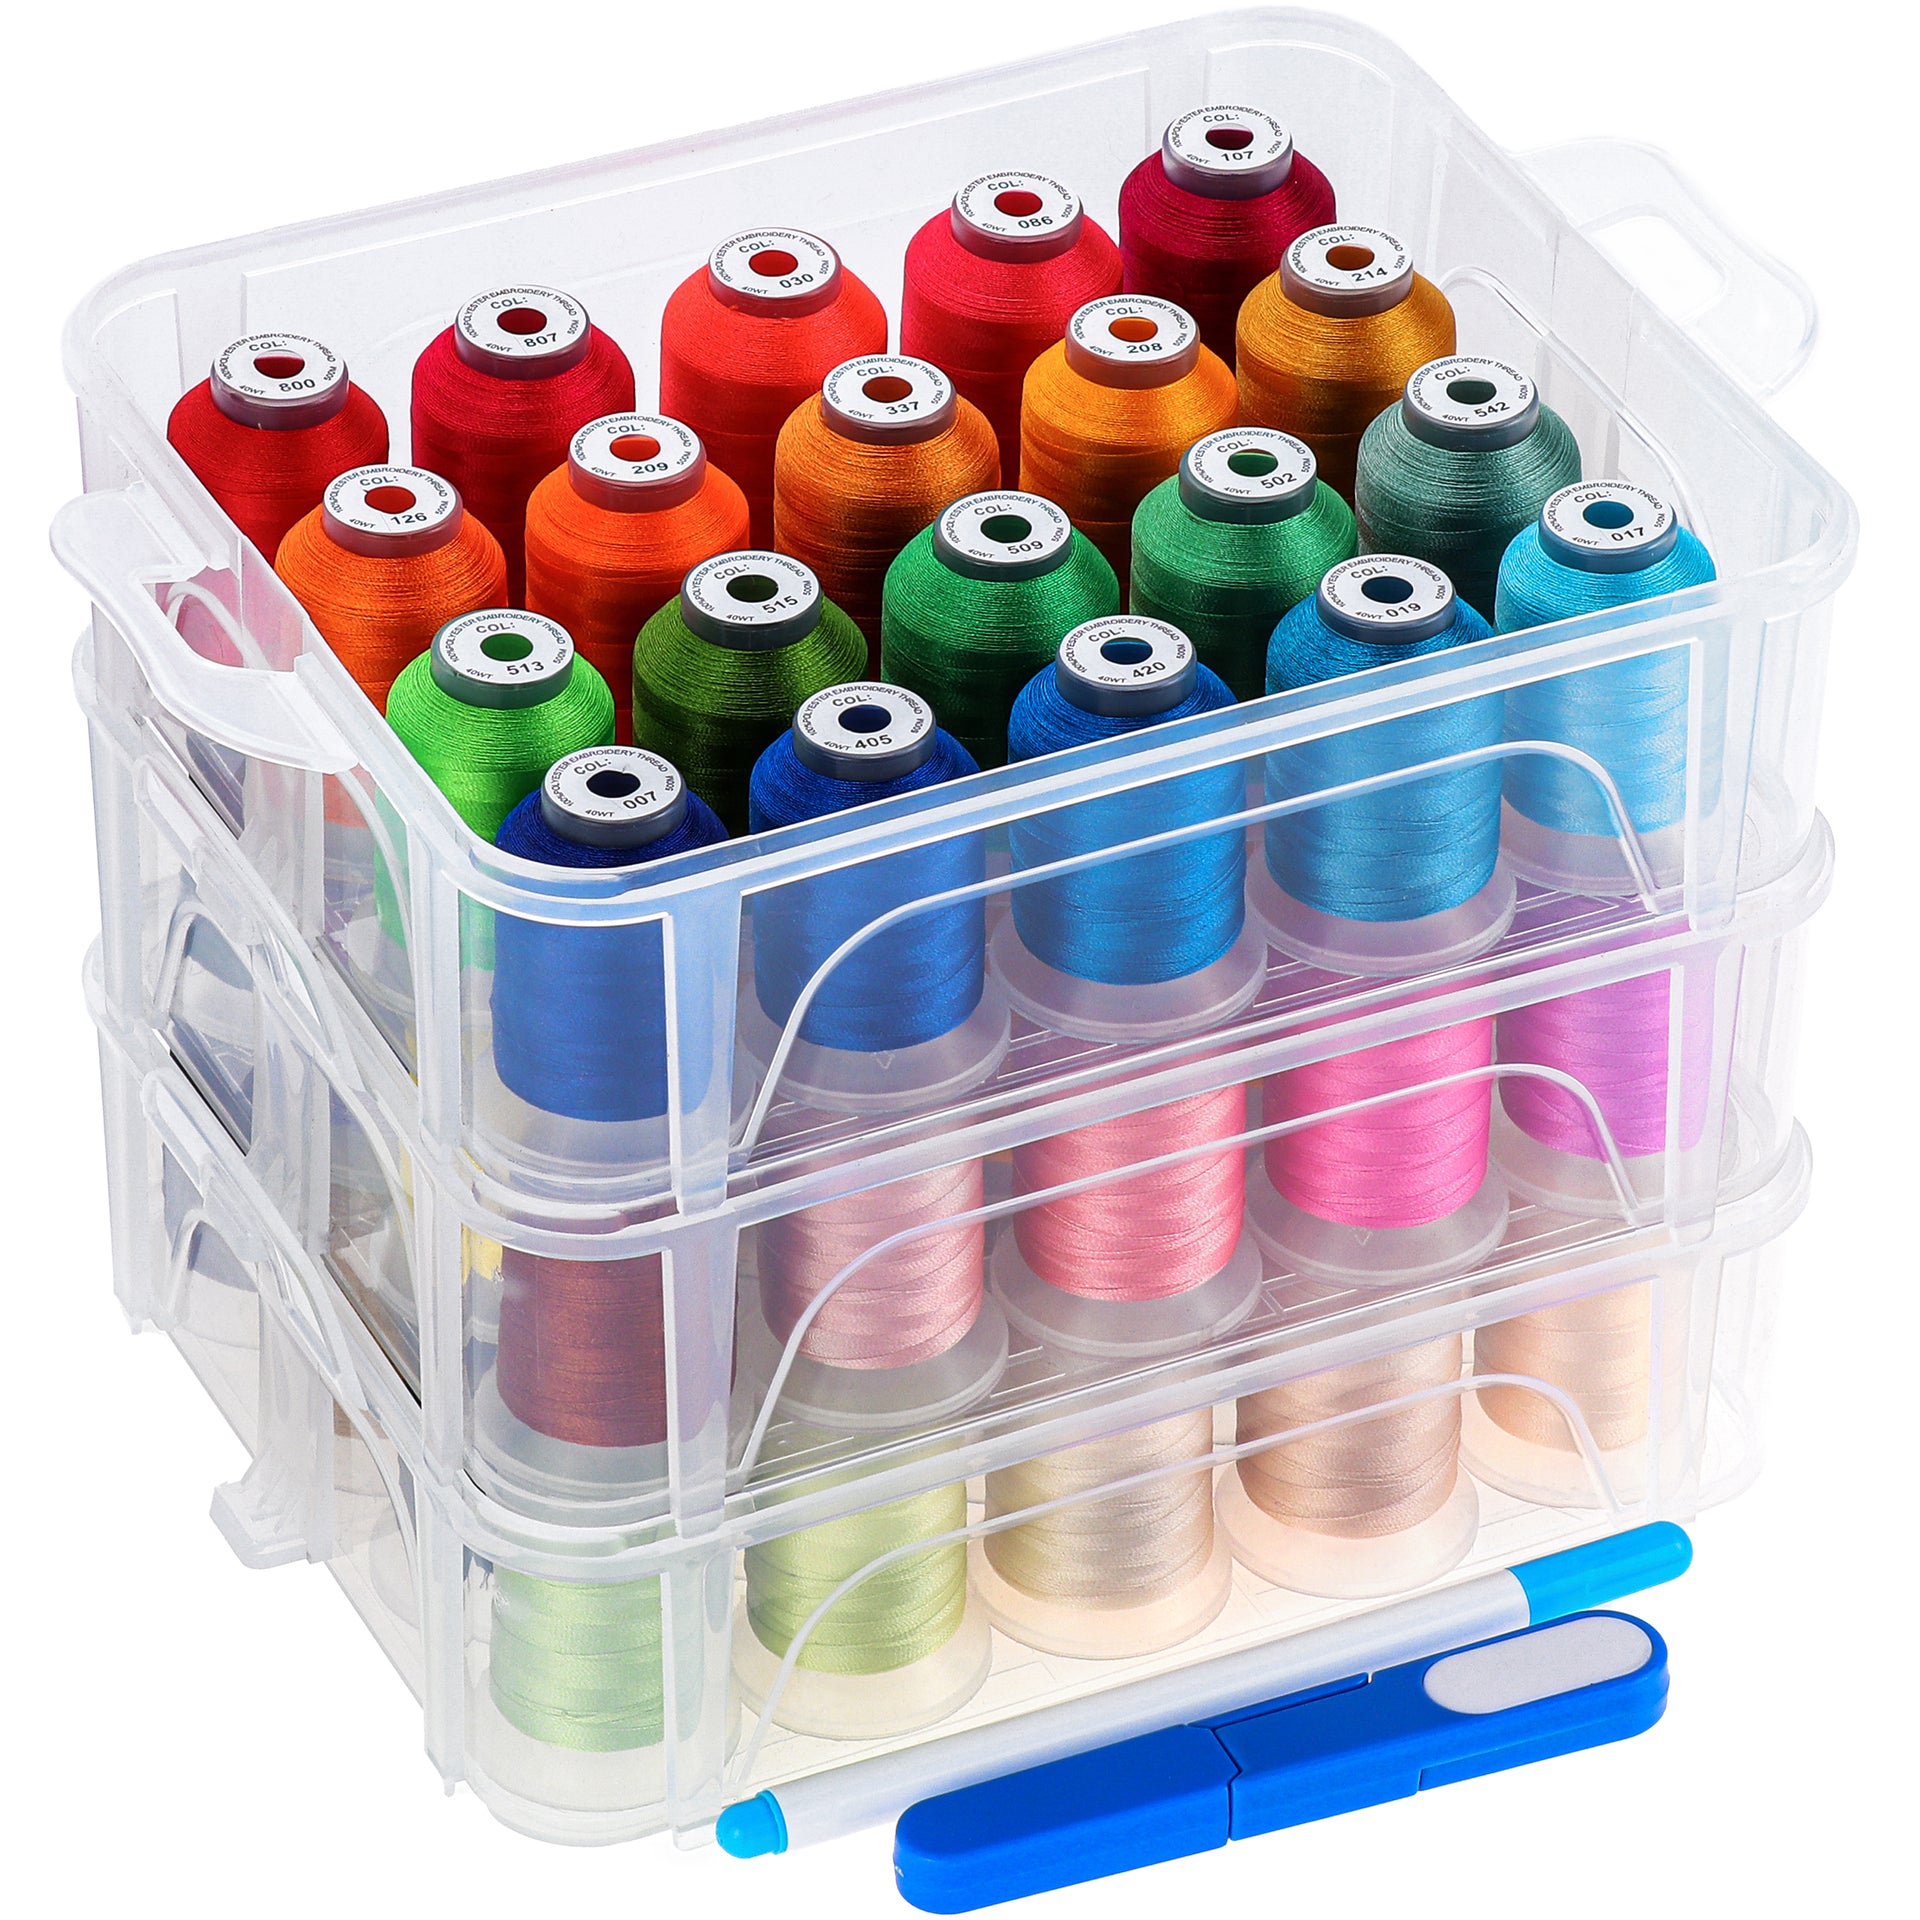 New brothread 2 Layers Stackable Clear Storage Box/Organizer for Holding 40  Spools Home Embroidery & Sewing Thread (Spool Size Requirement